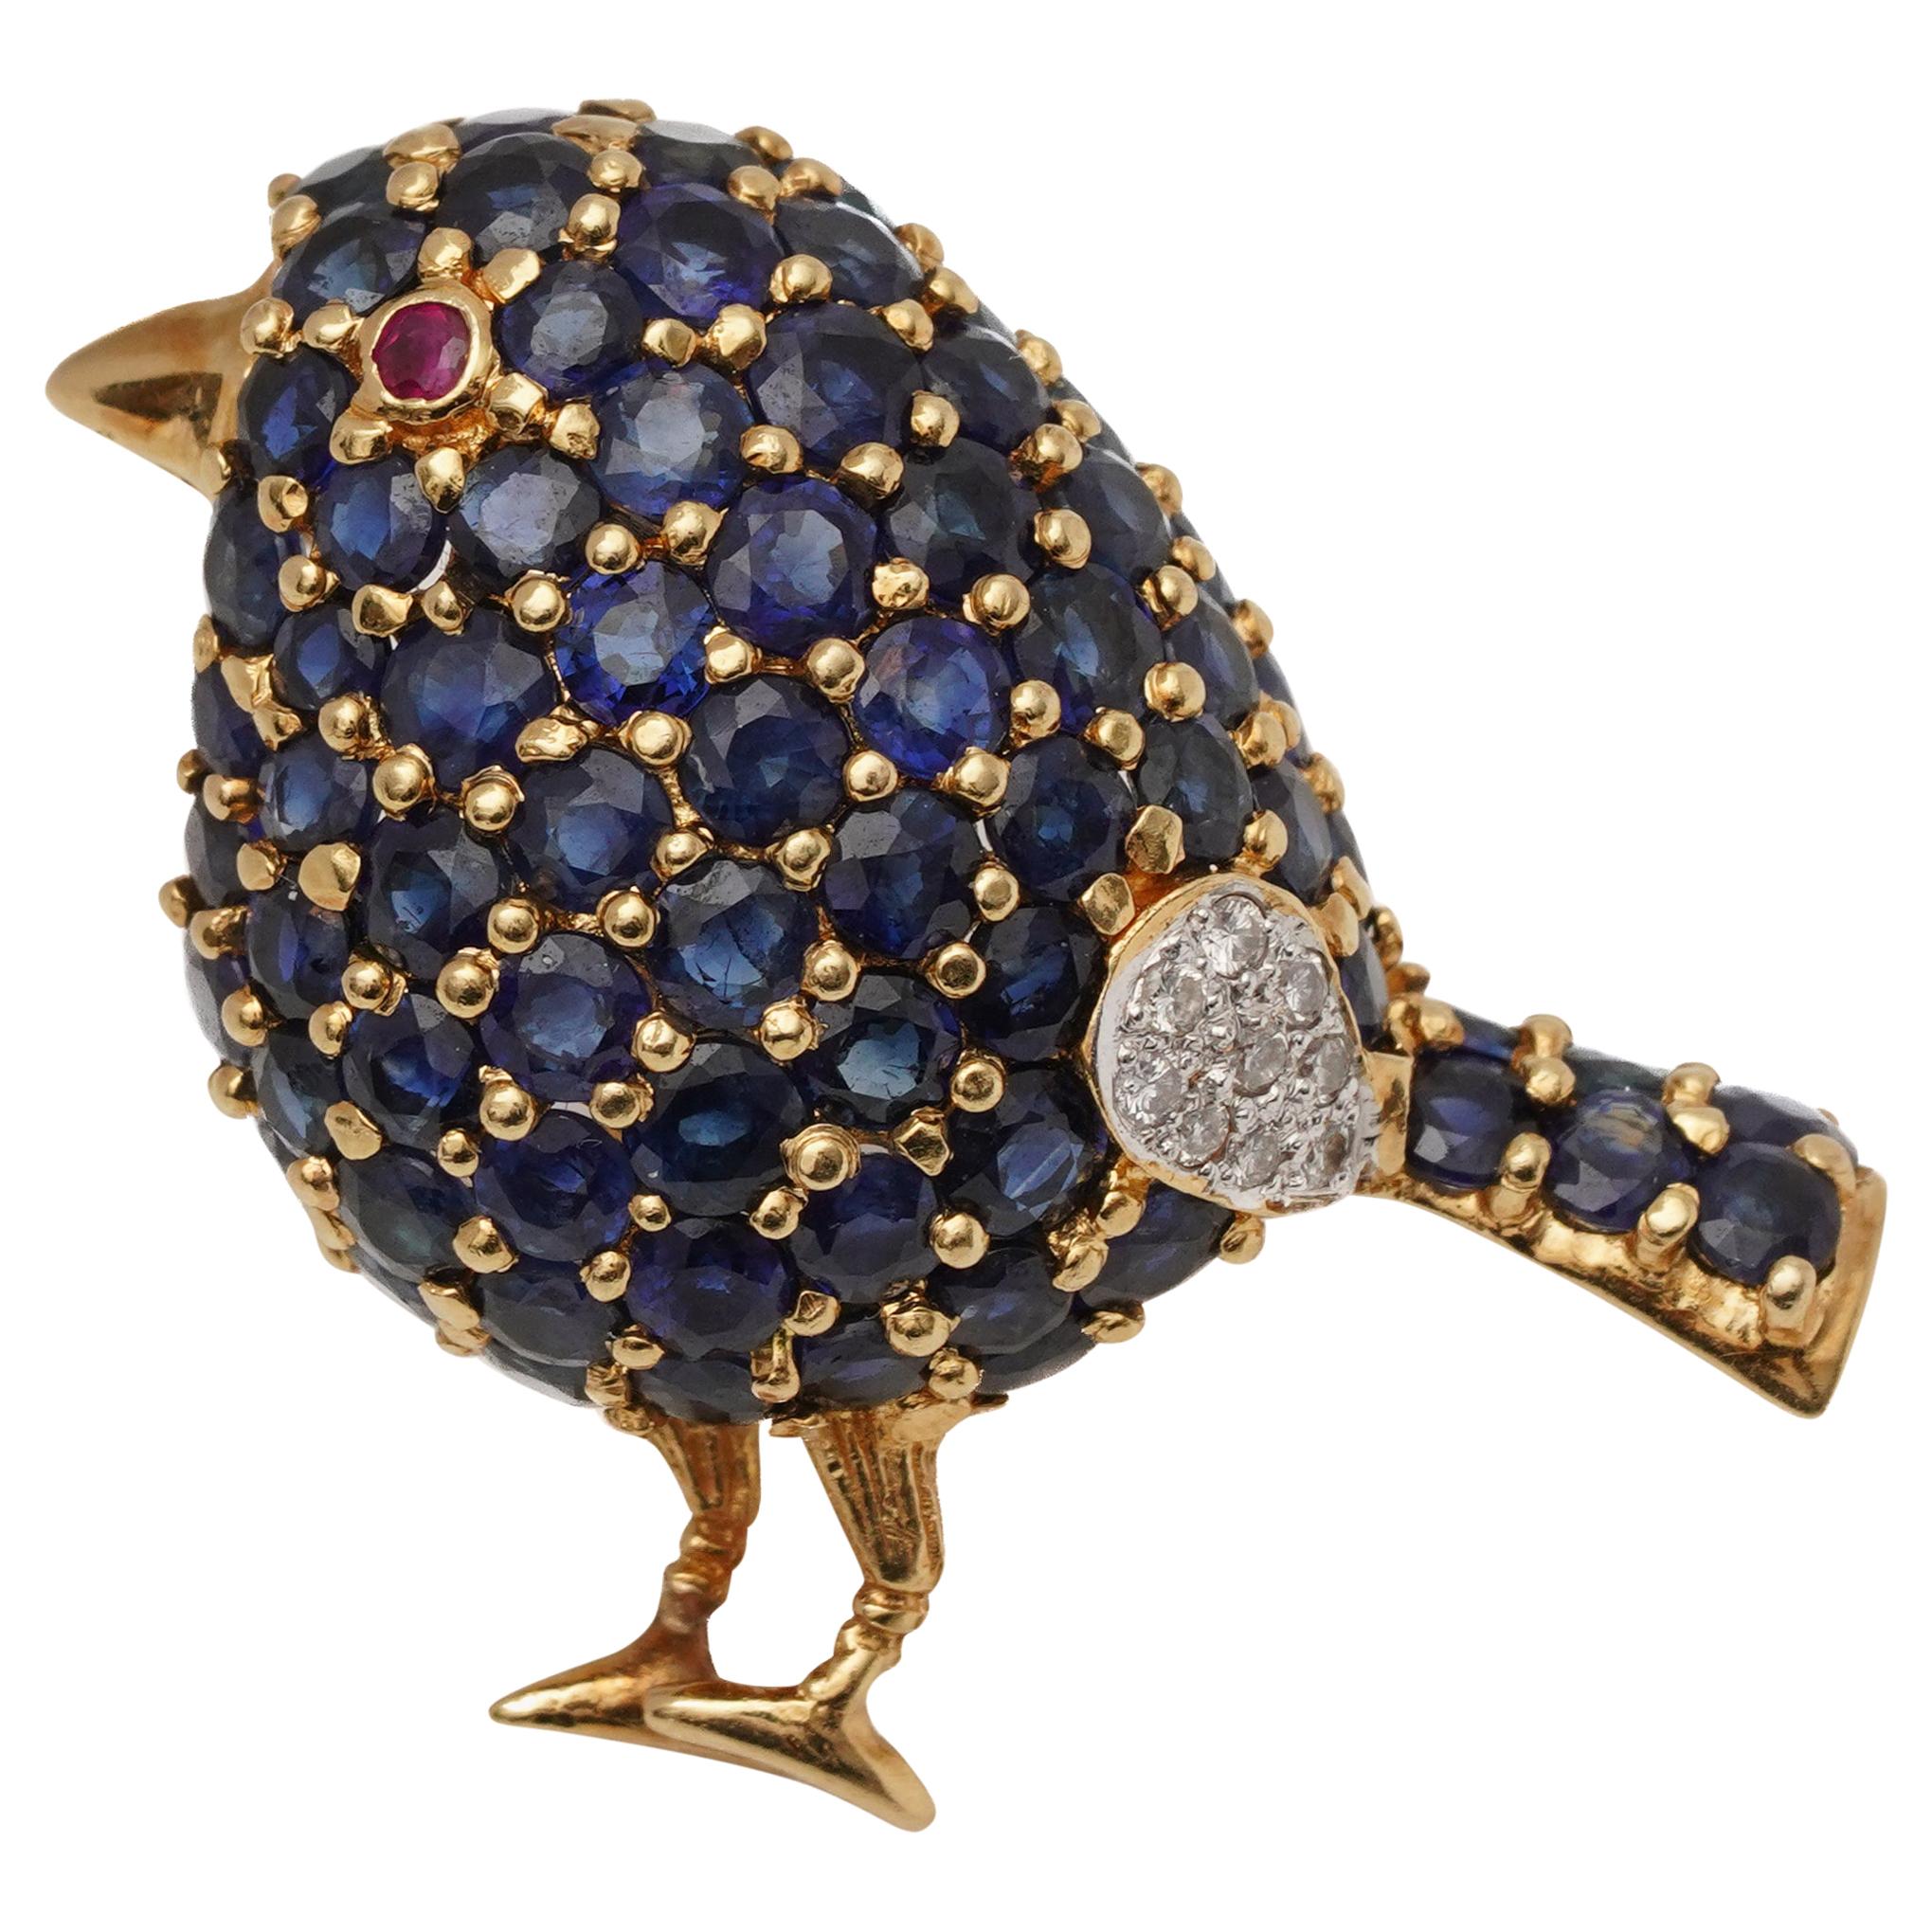 1950s 1 Carat Sapphire Bird with Ruby and Diamond Accents Pin Brooch